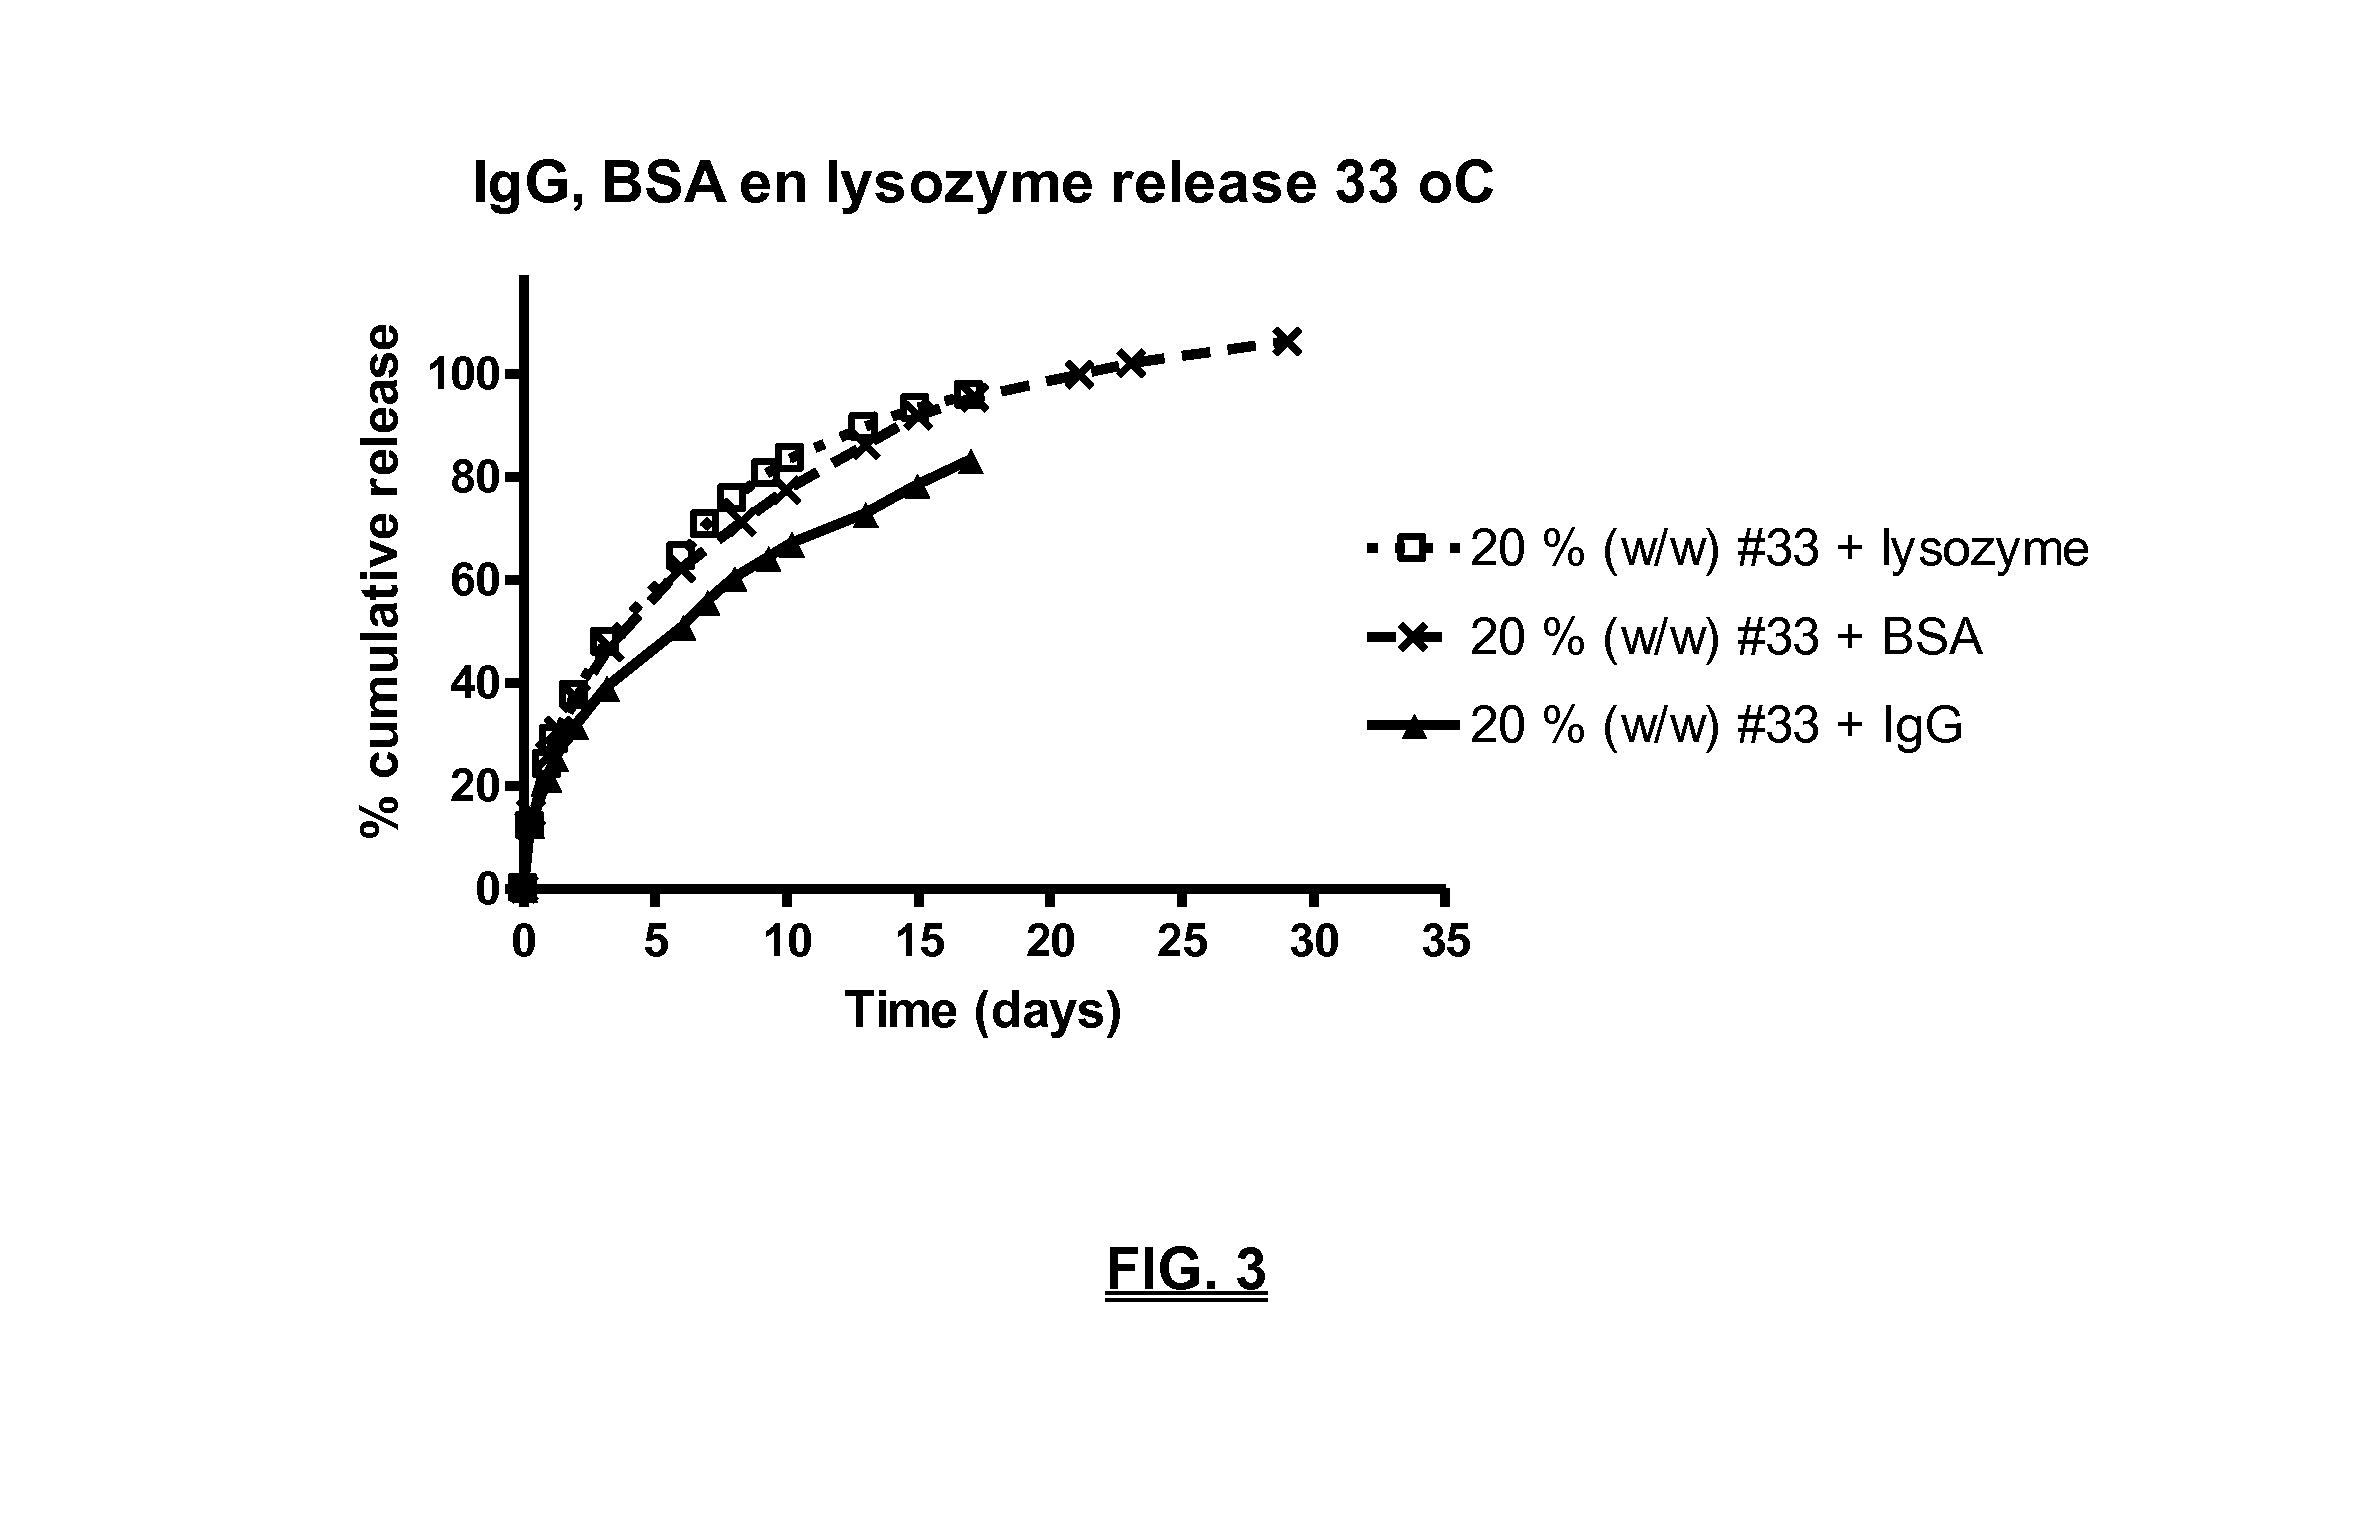 Biodegradable compositions suitable for controlled release